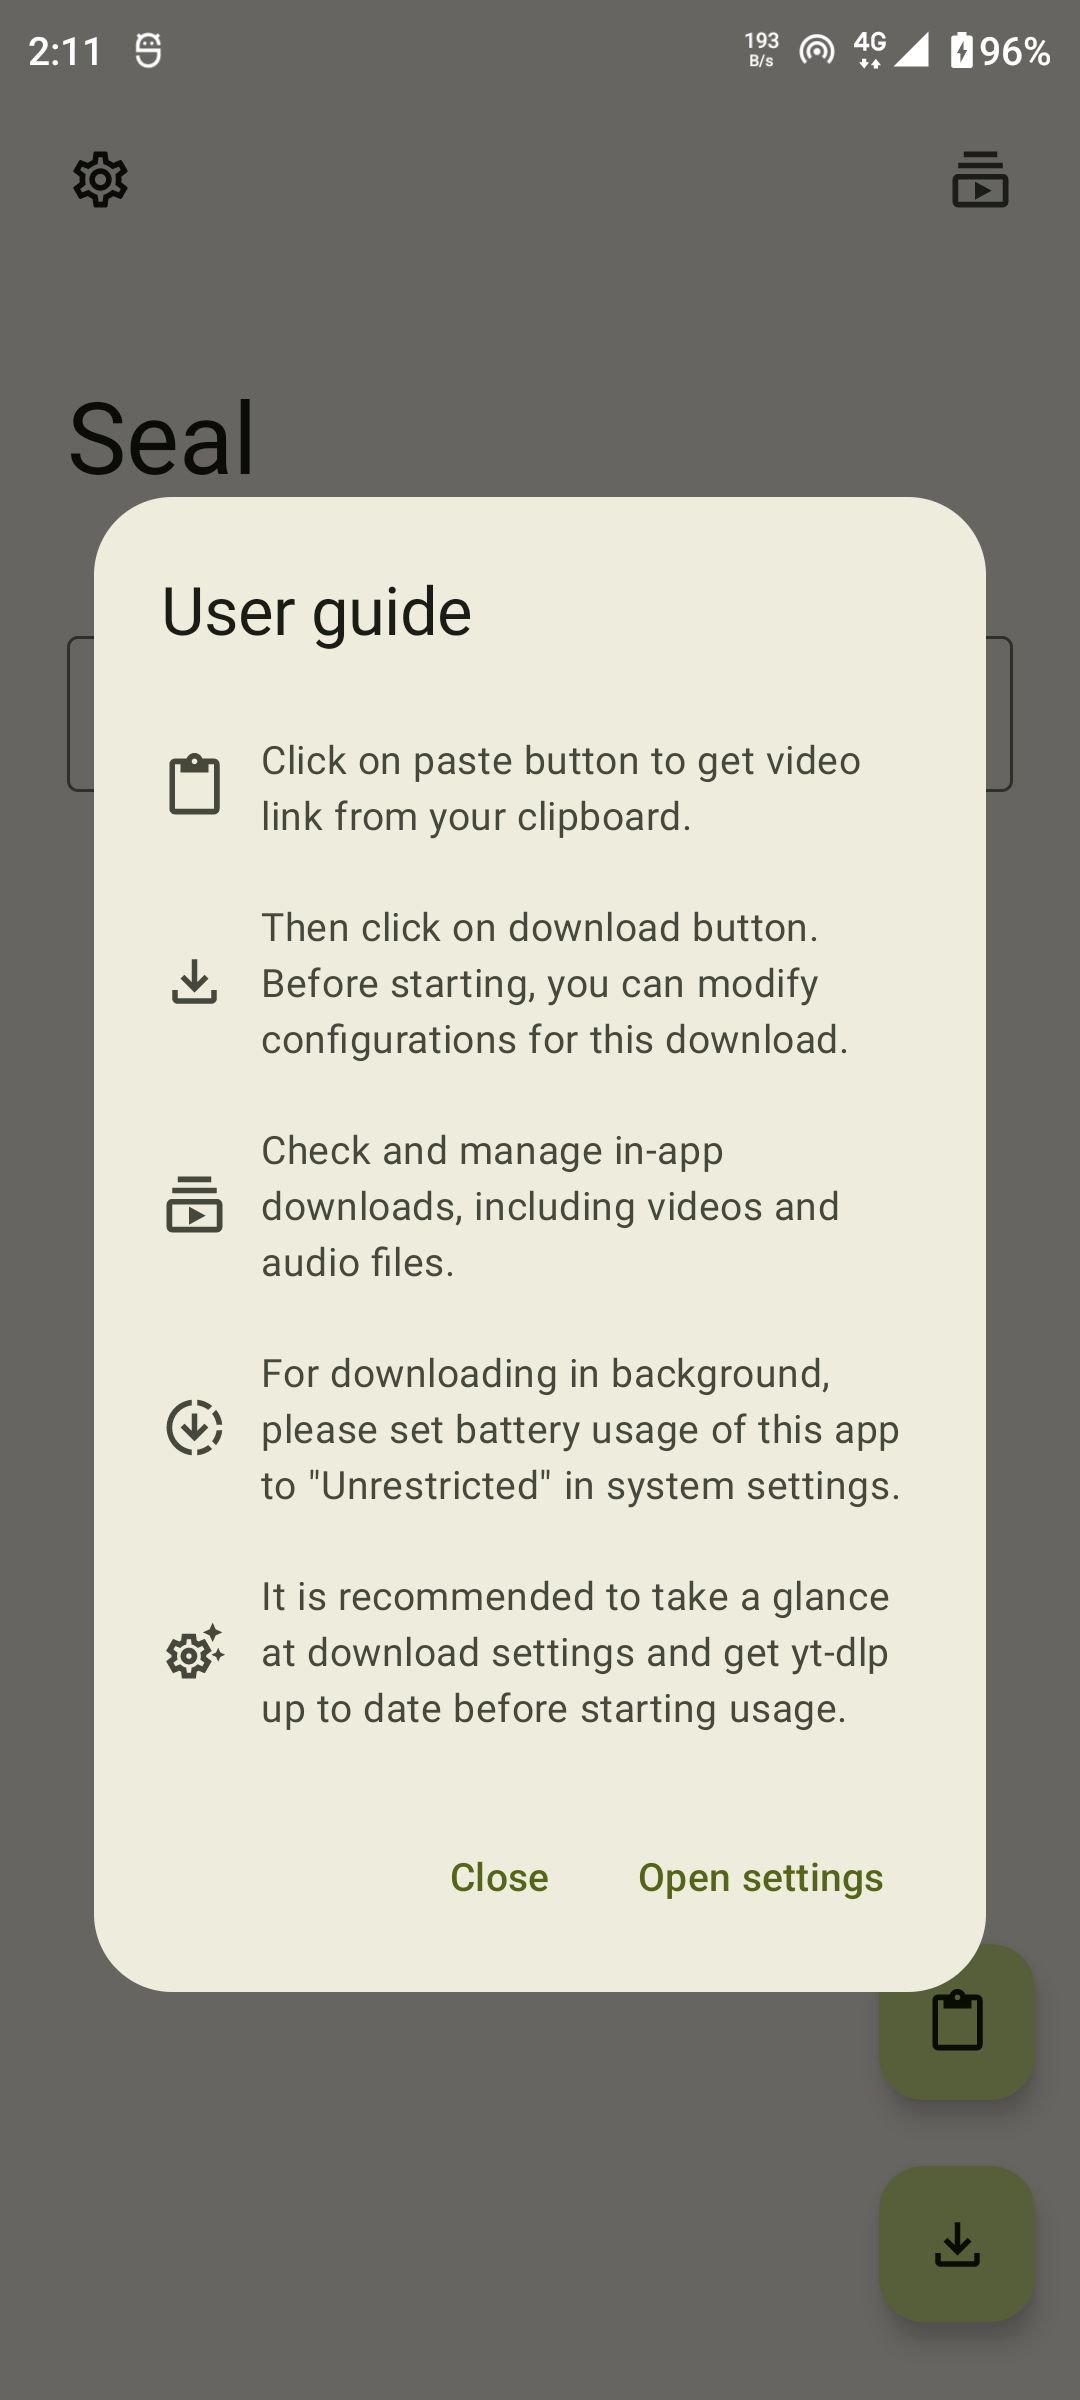 MediaHuman  To MP3 Converter Alternatives for Android: Top